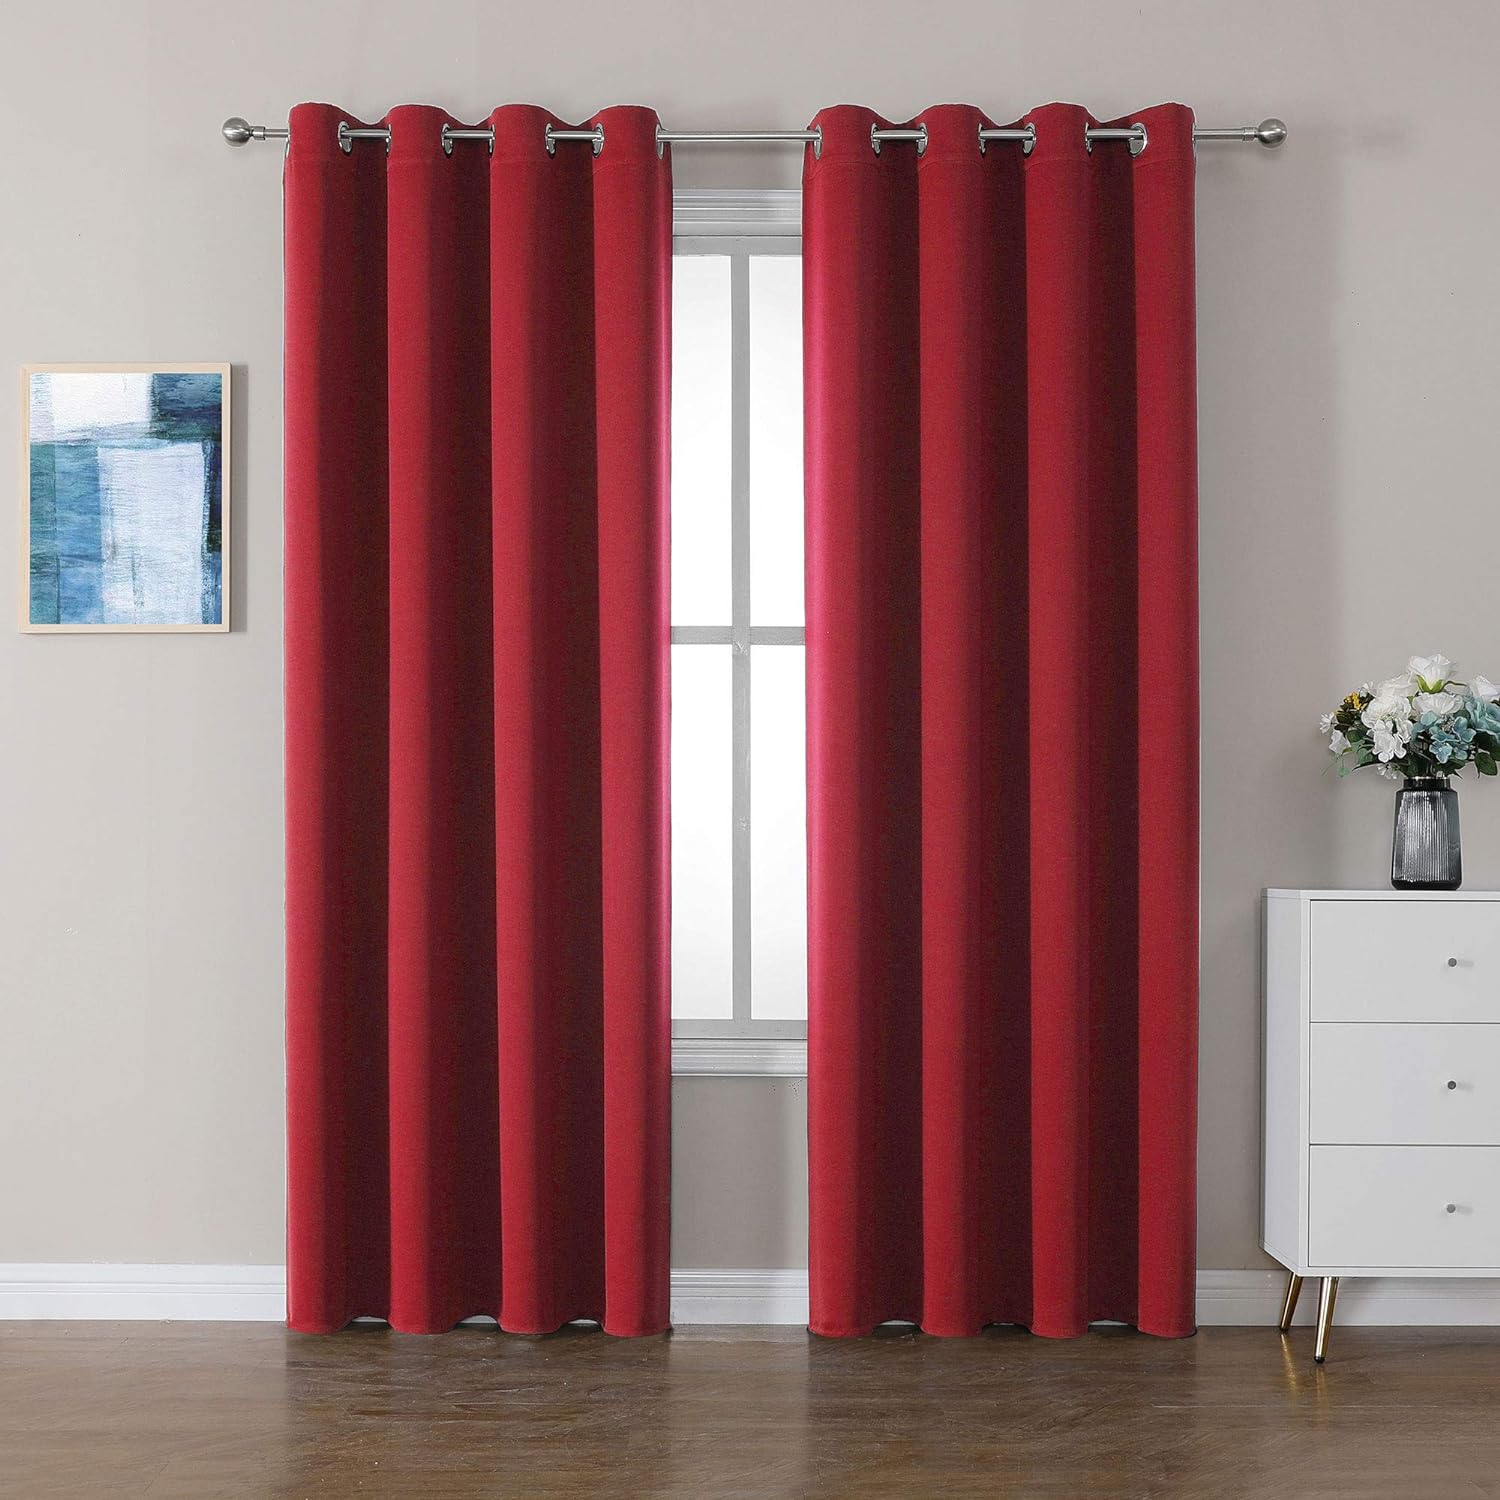 2X Blackout Curtain Living Room Bedroom Window Eyelet Drapes Pair Multi-color